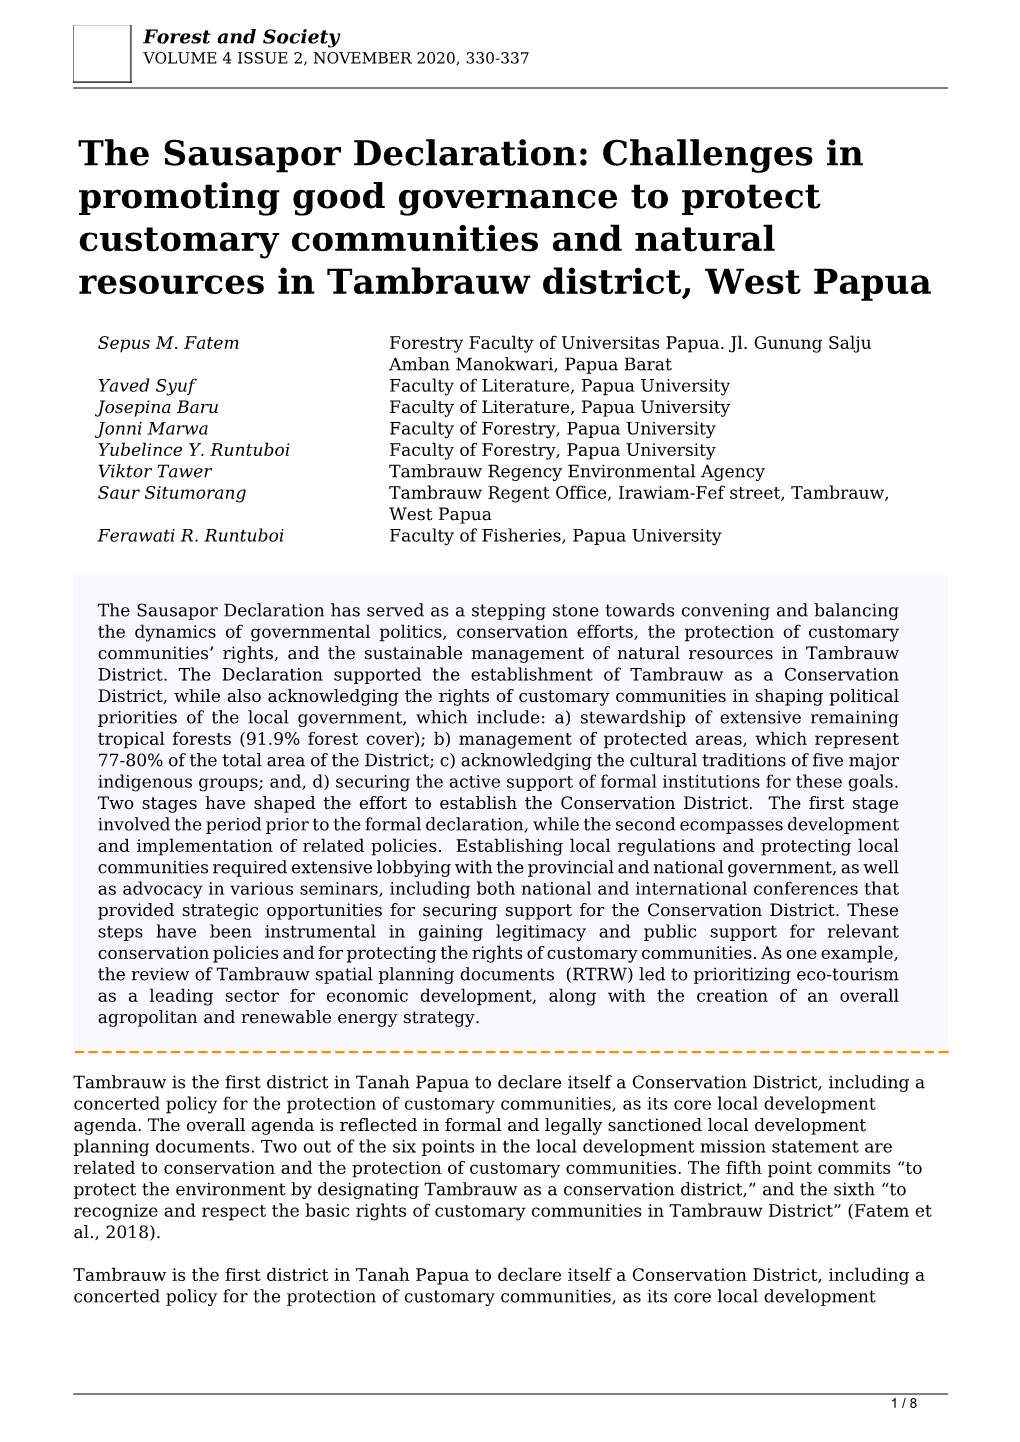 The Sausapor Declaration: Challenges in Promoting Good Governance to Protect Customary Communities and Natural Resources in Tambrauw District, West Papua